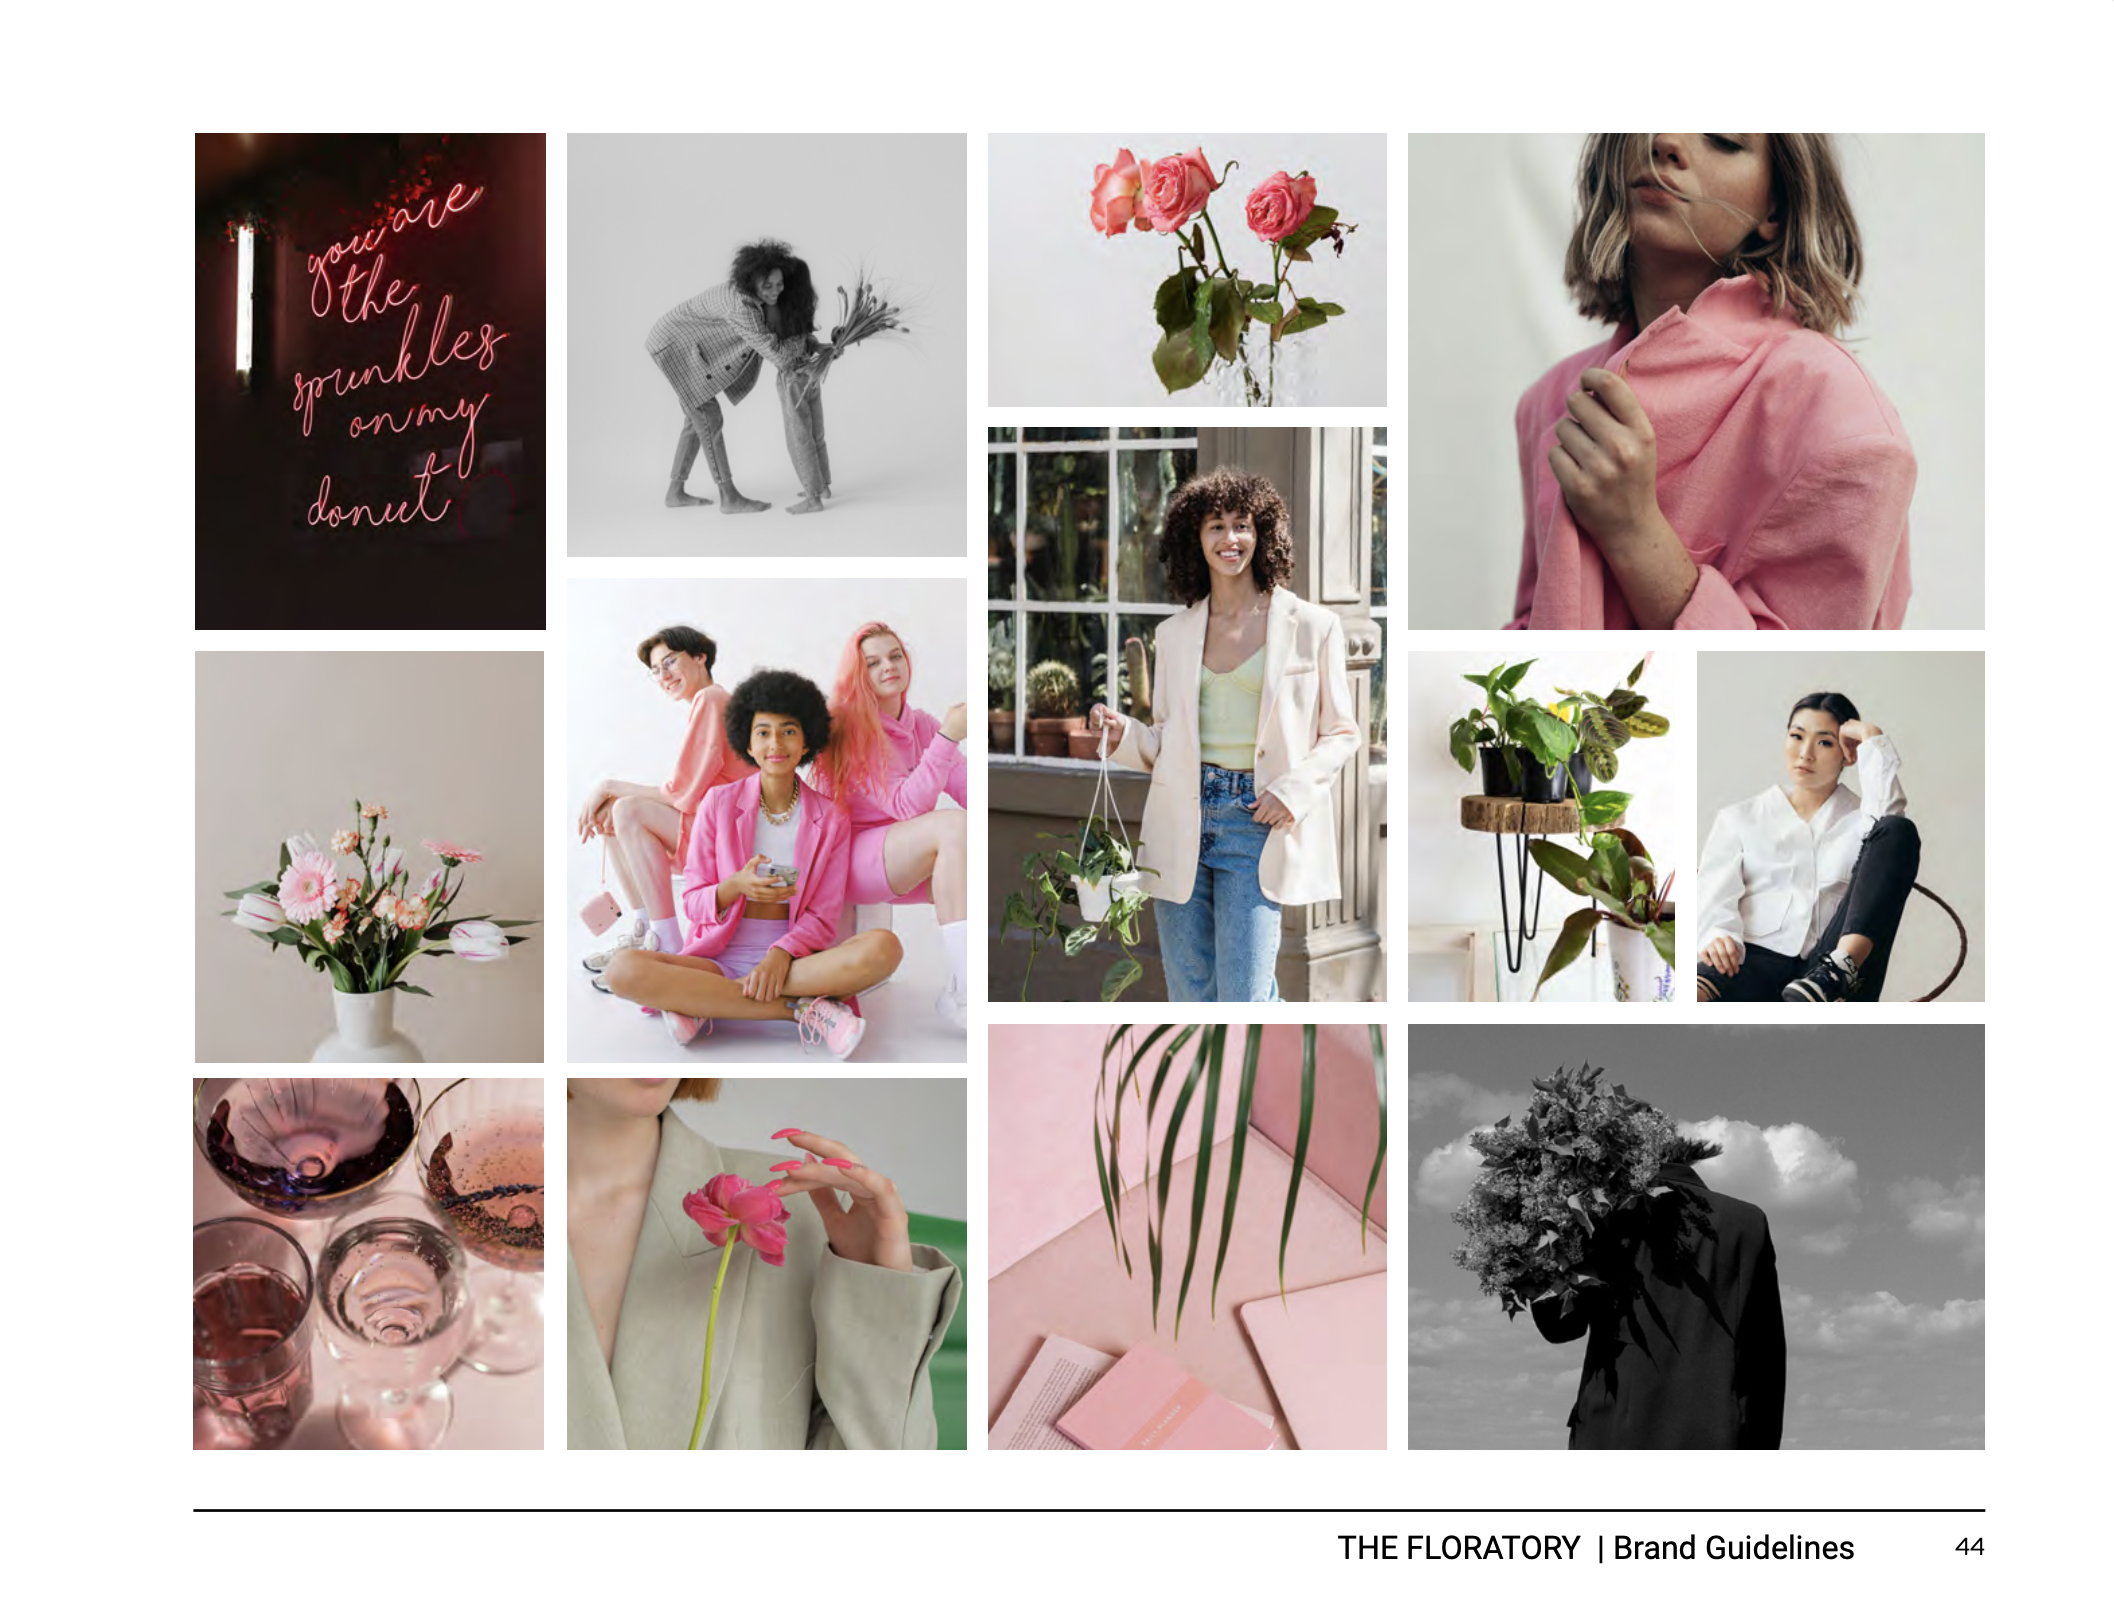  photography moodboard from the floratory’s brand guidelines 